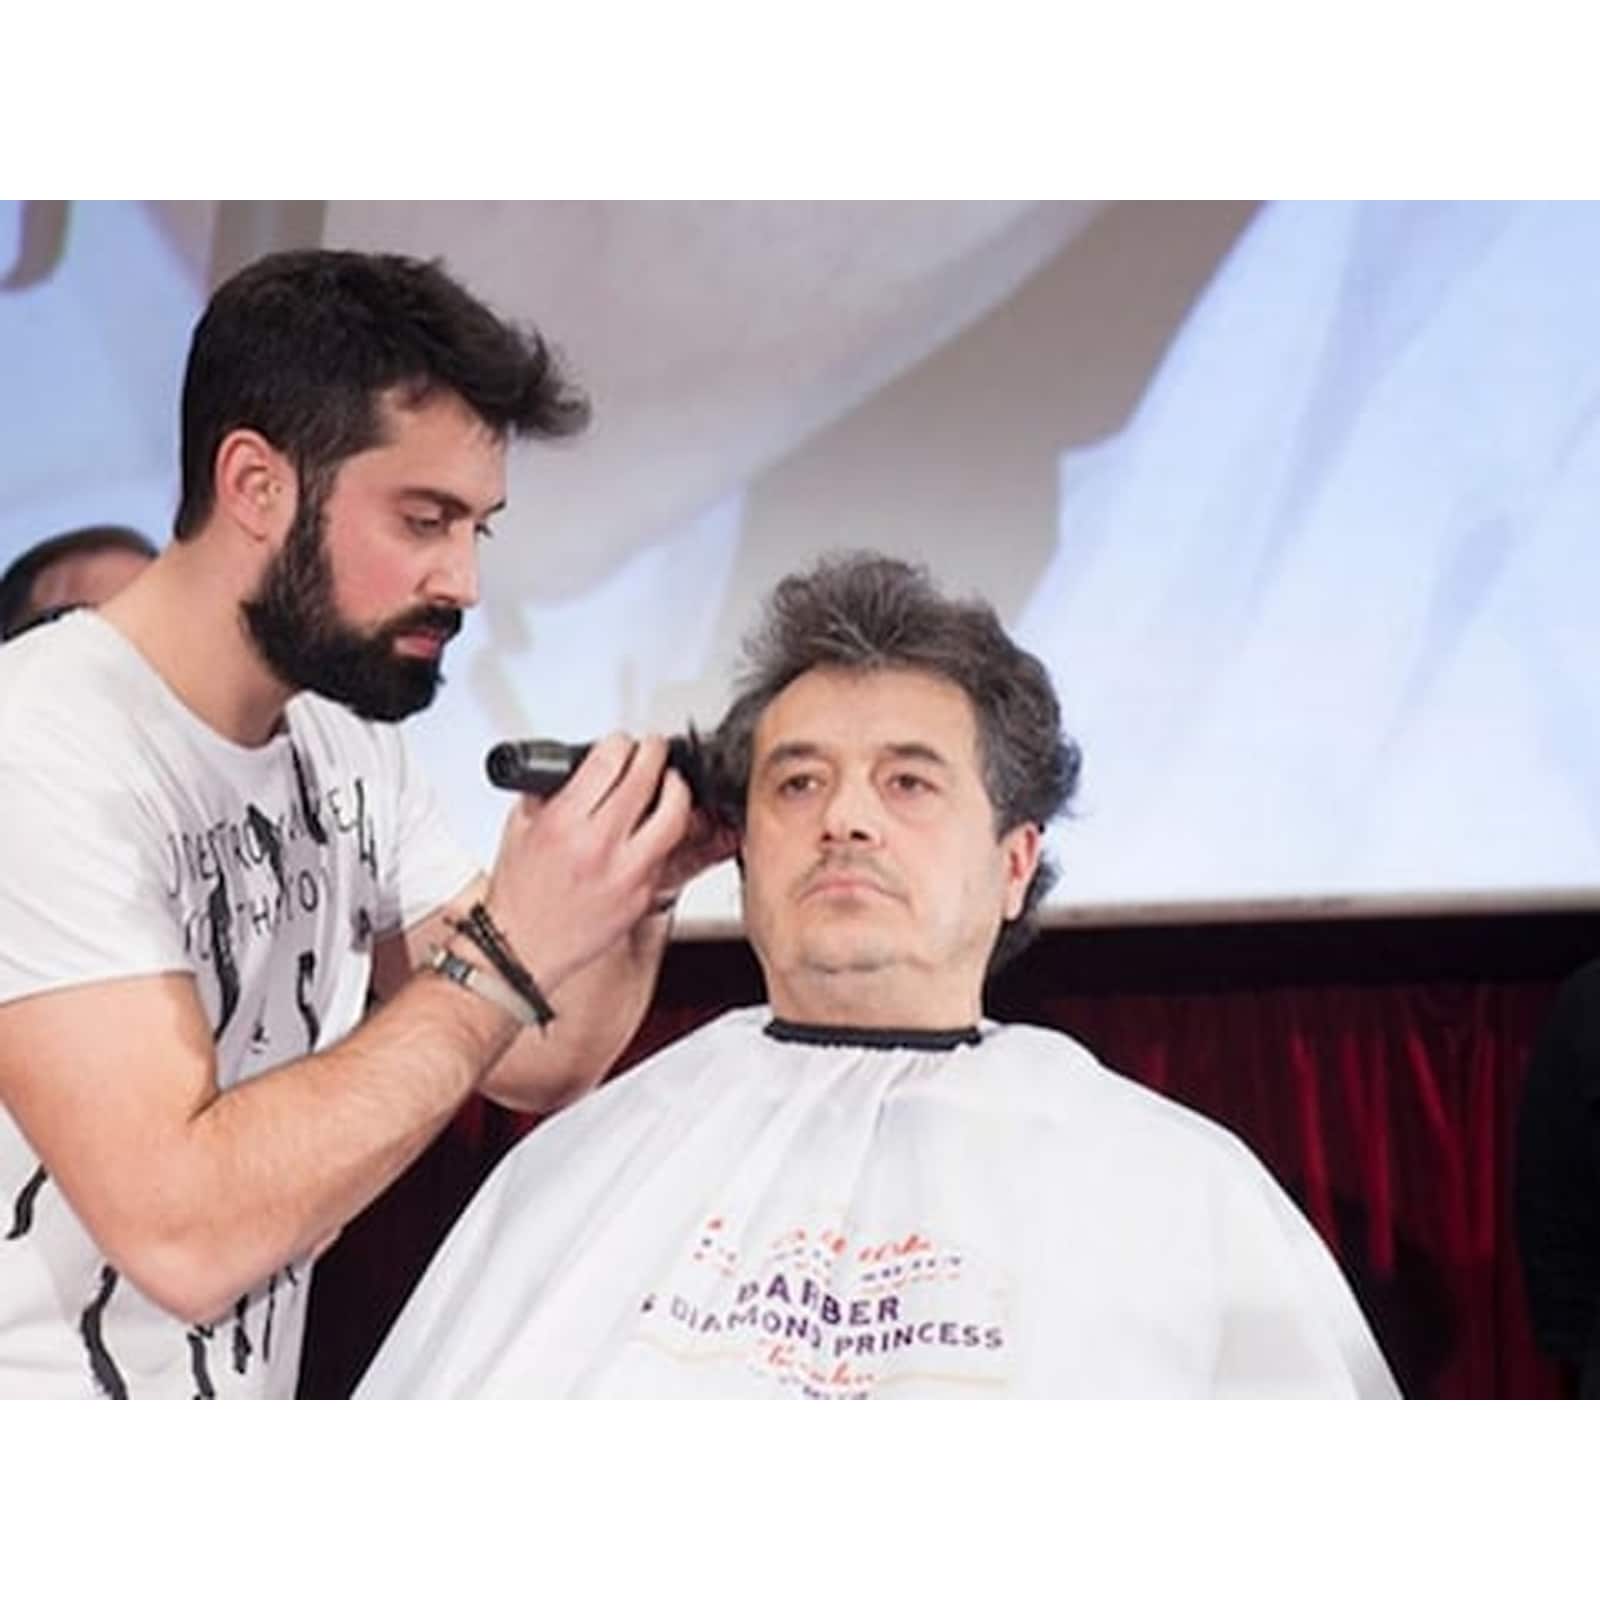 Haircut In 47 Seconds: This Hairdresser From Greece Sets A Record